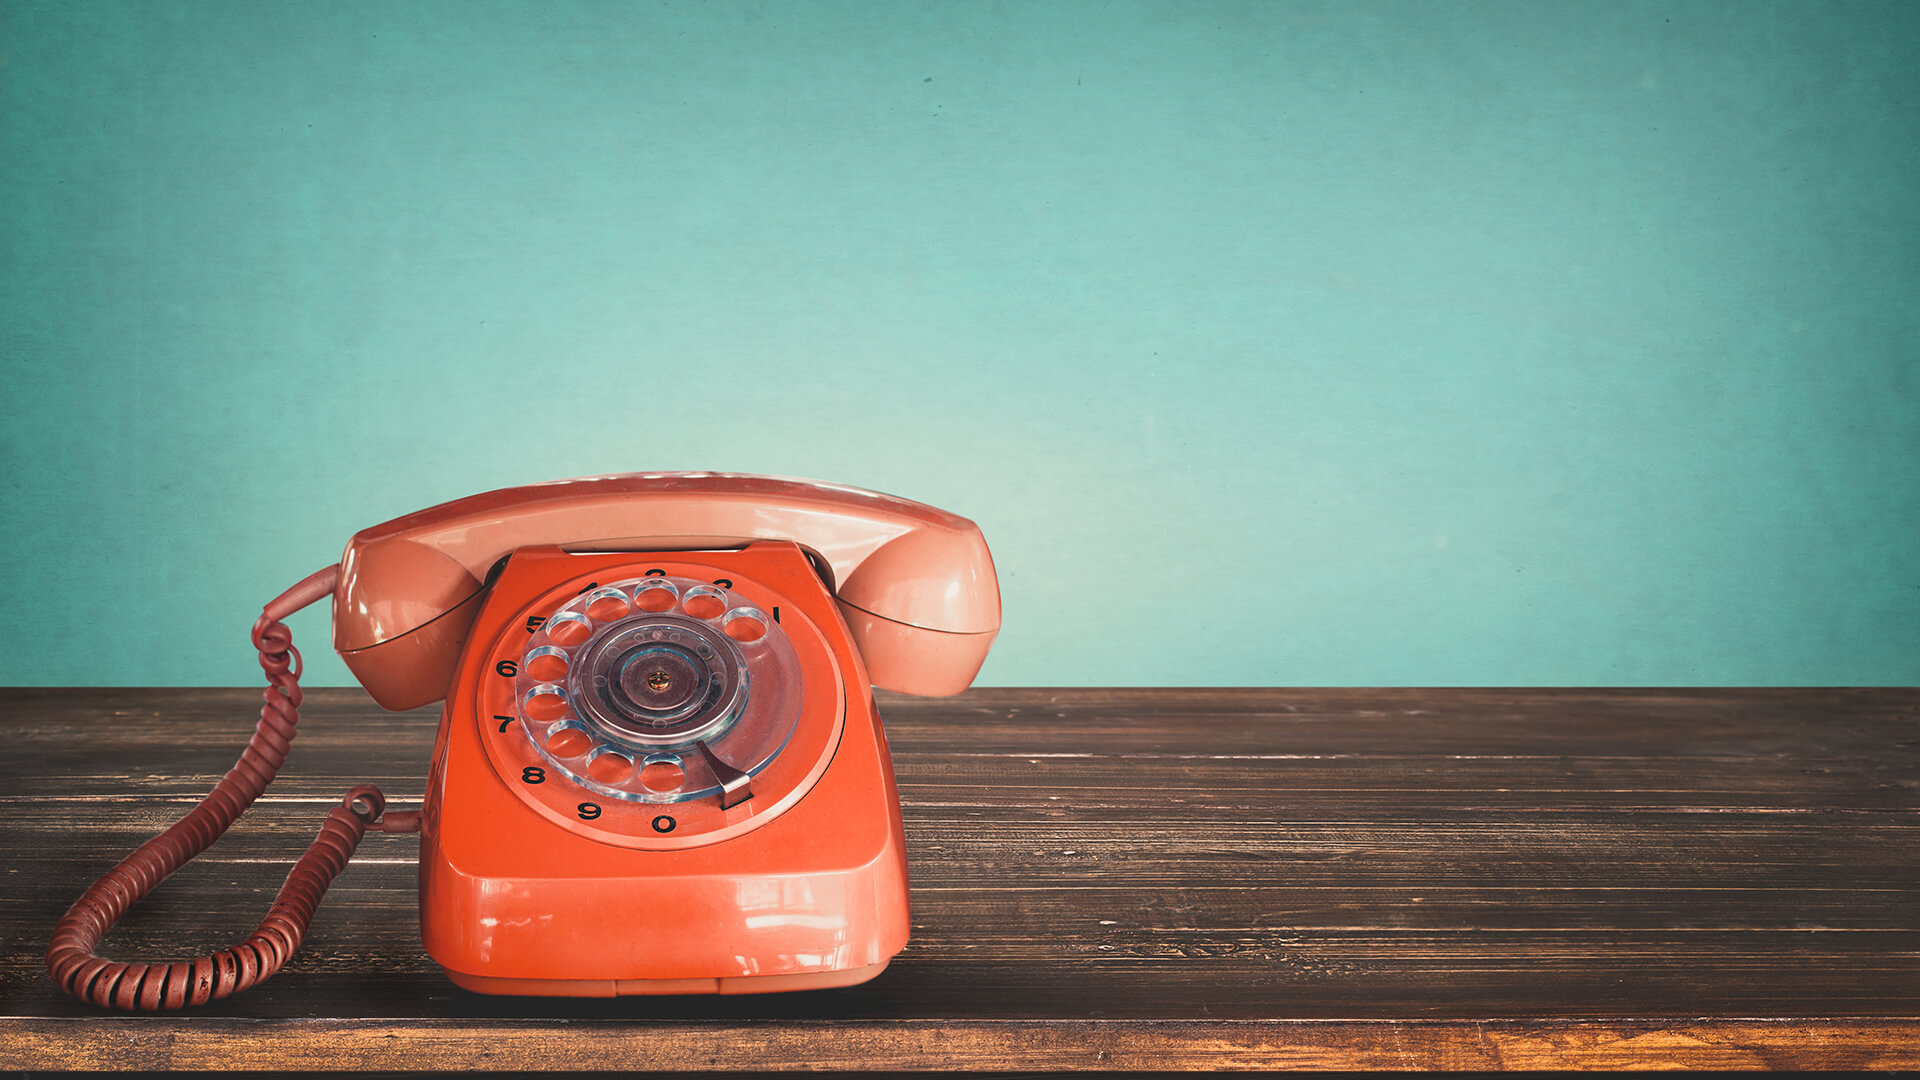 Don't call me: Nearly 90% of customers won't answer the phone anymore [Study]